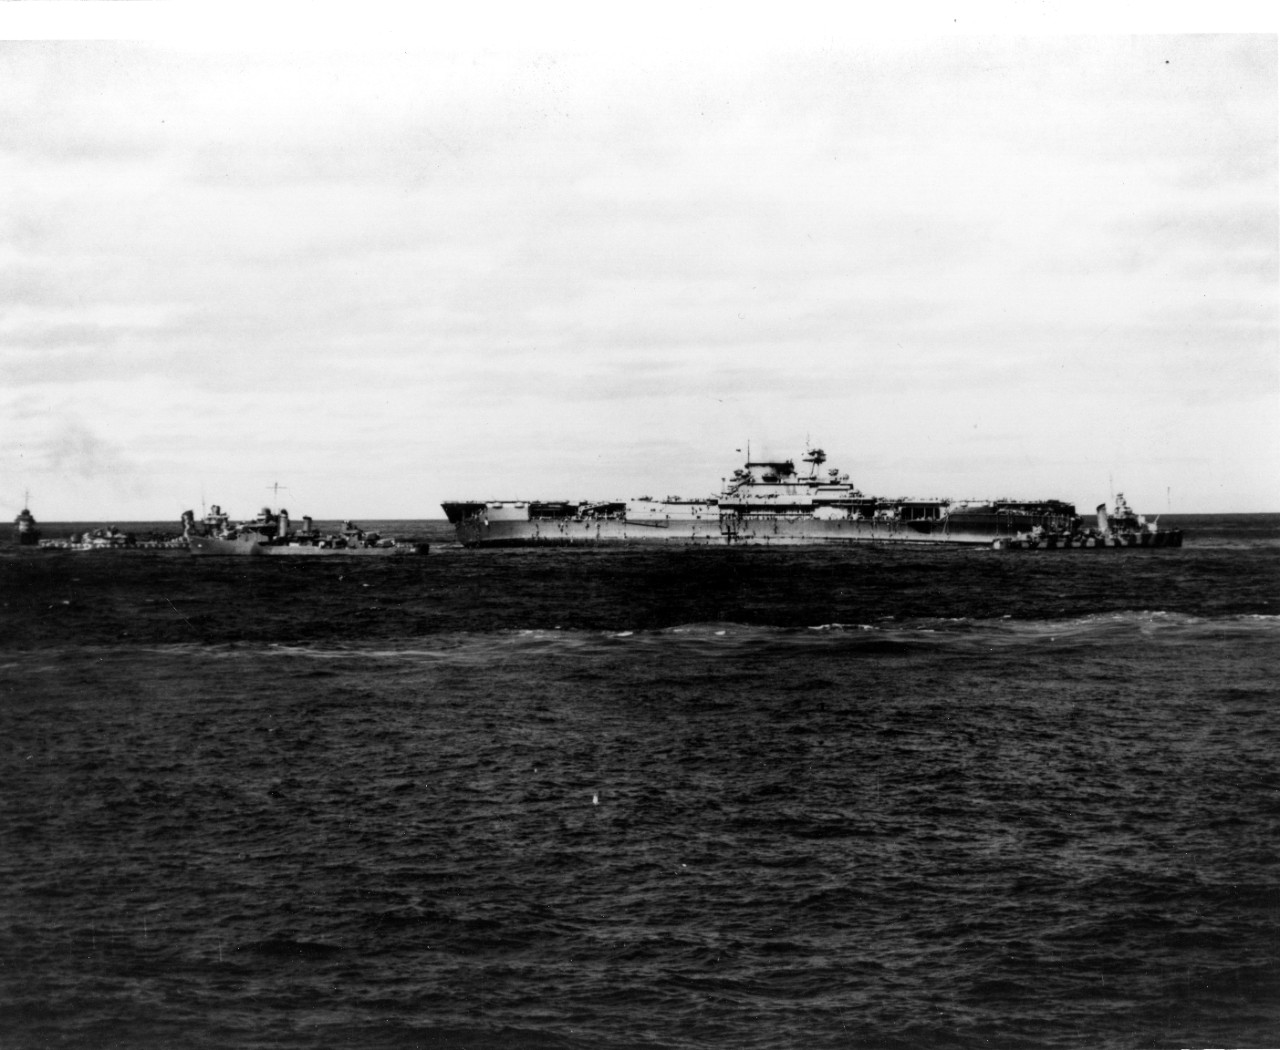 Photo #: 80-G-21694  Battle of Midway, June 1942